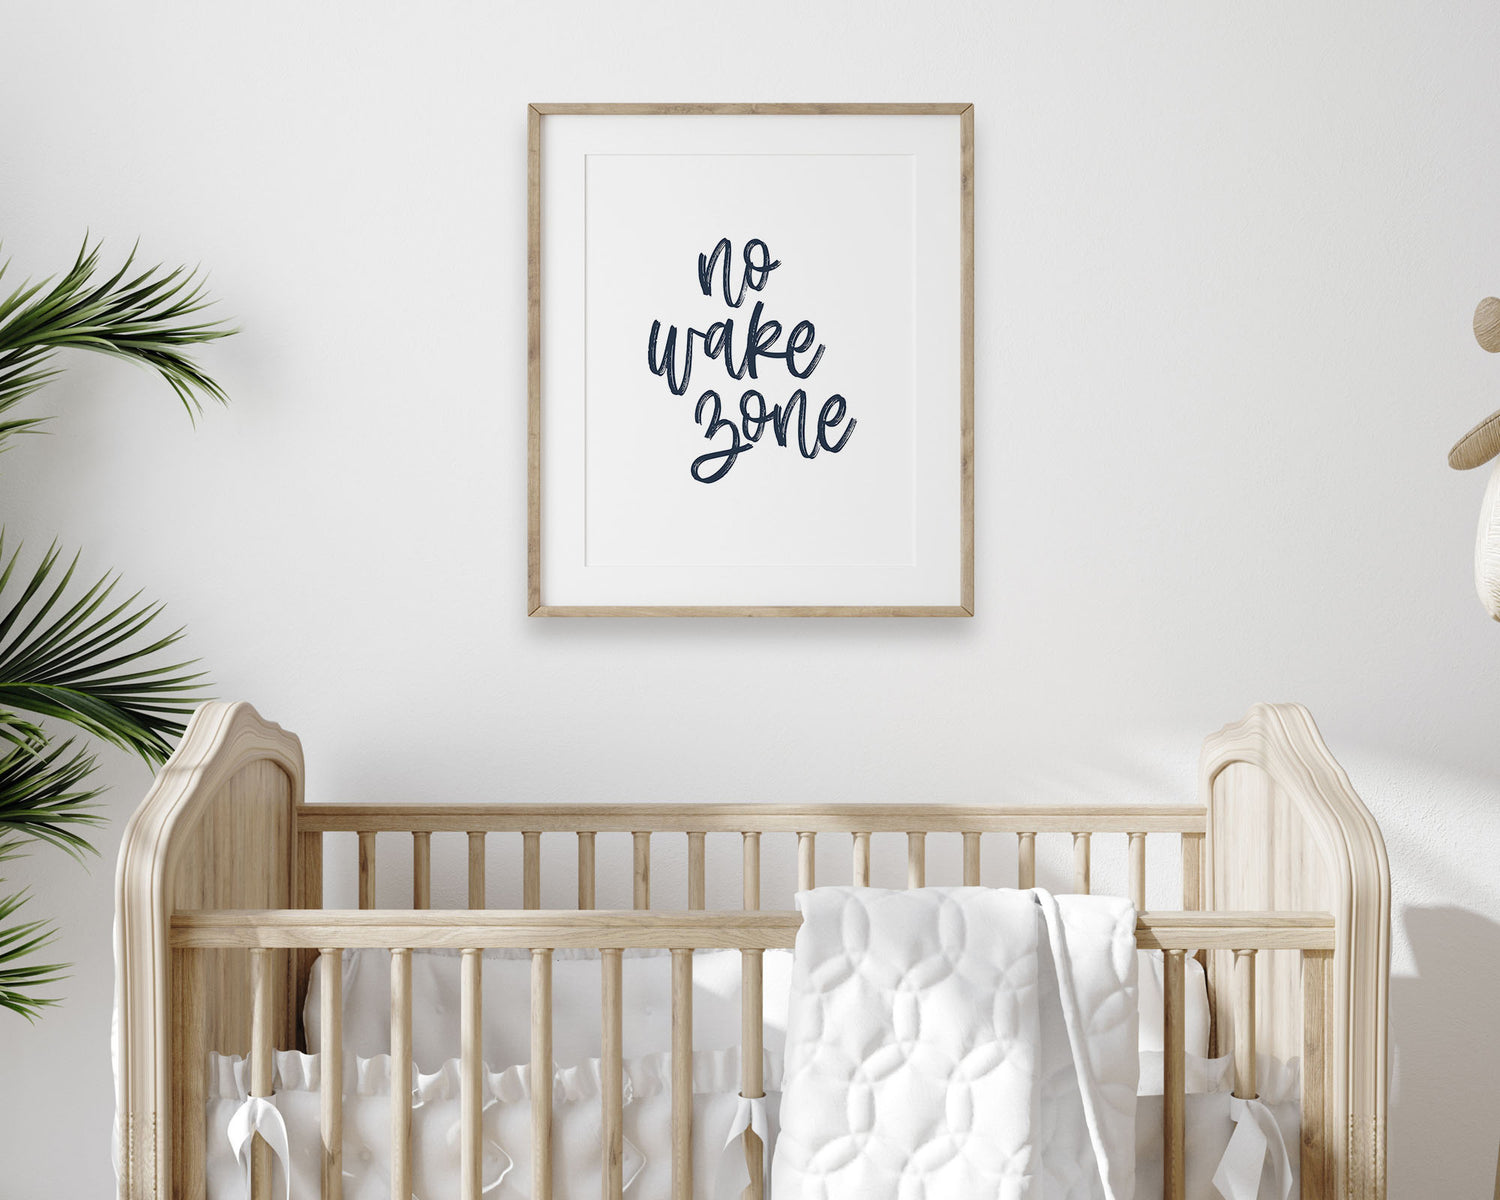 Navy Blue No Wake Zone Printable Wall Art featuring a textured brush style cursive lettered quote perfect for Baby Boy Nautical Nursery Decor, Baby Girl Surf Nursery Wall Art, Nautical Kids Bedroom Decor or Children's Coastal Wall Art.